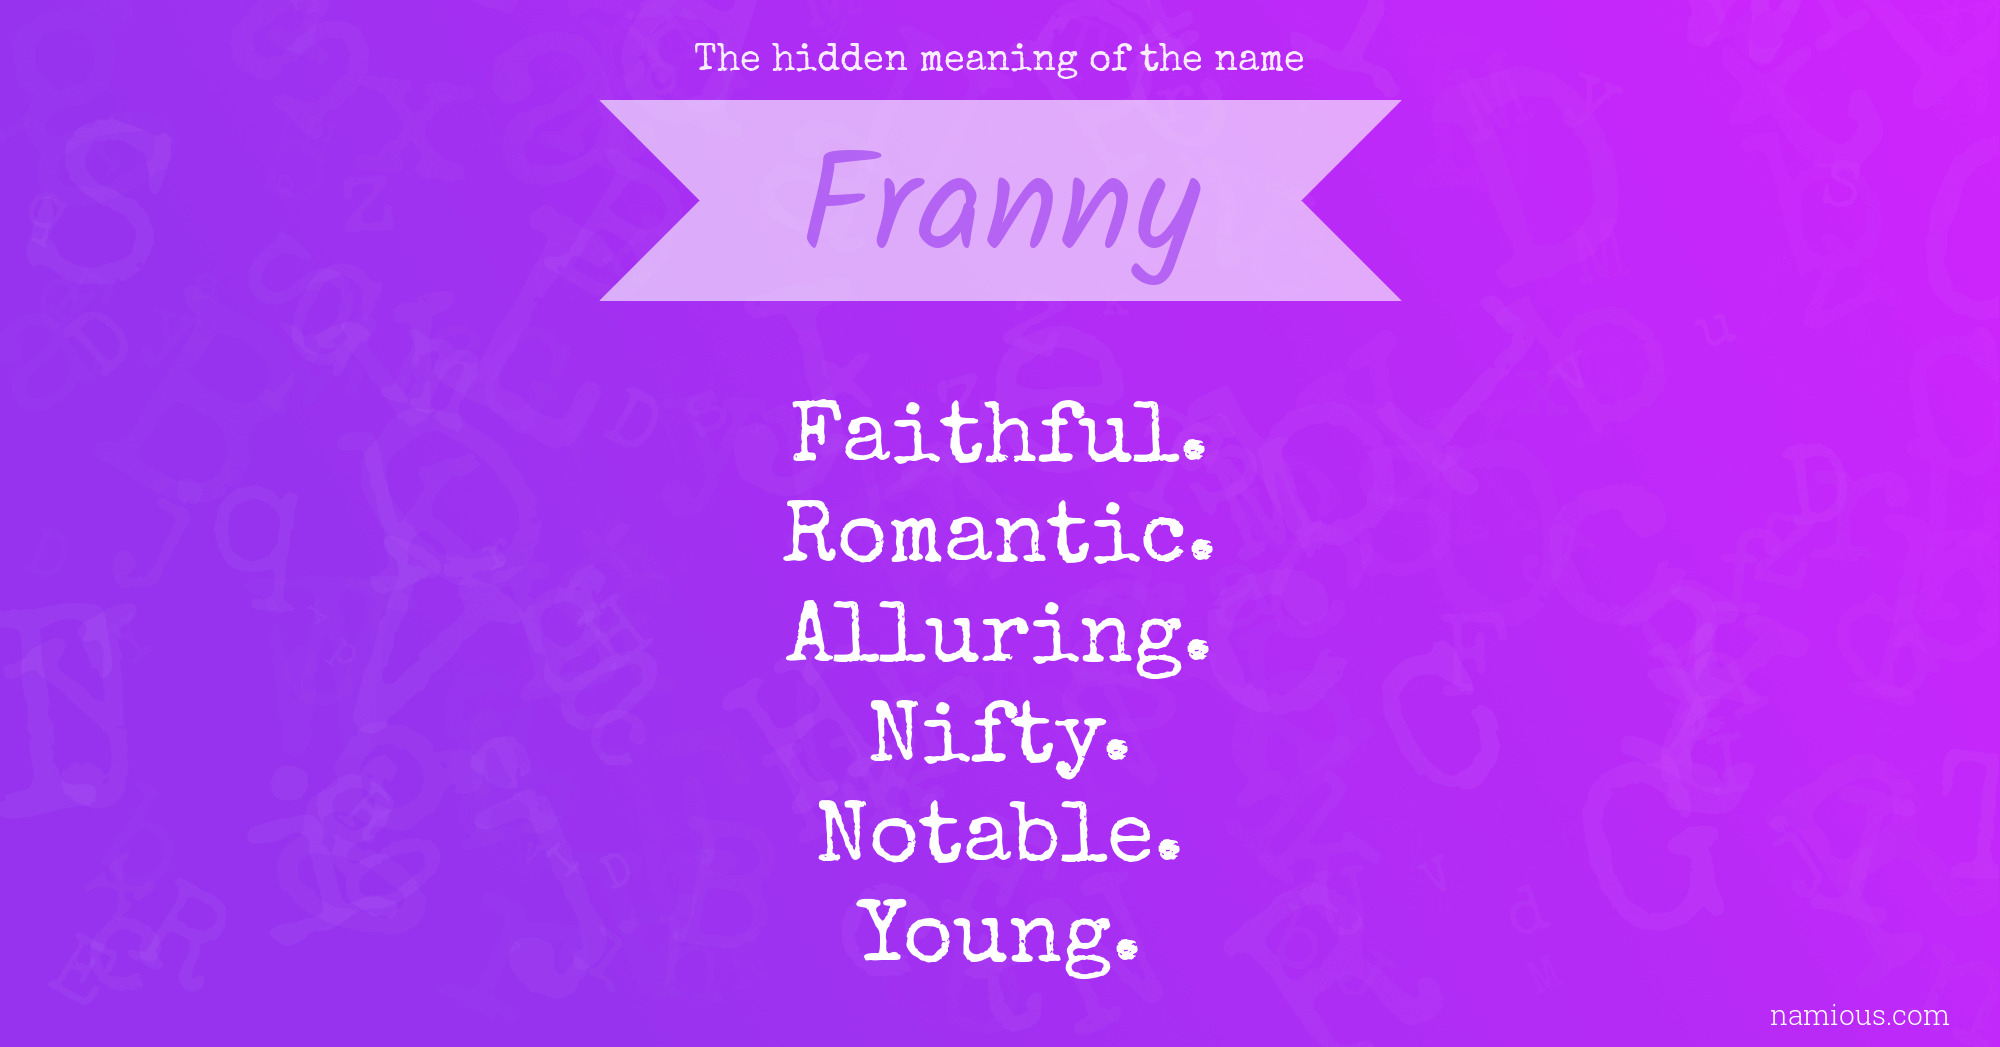 The hidden meaning of the name Franny